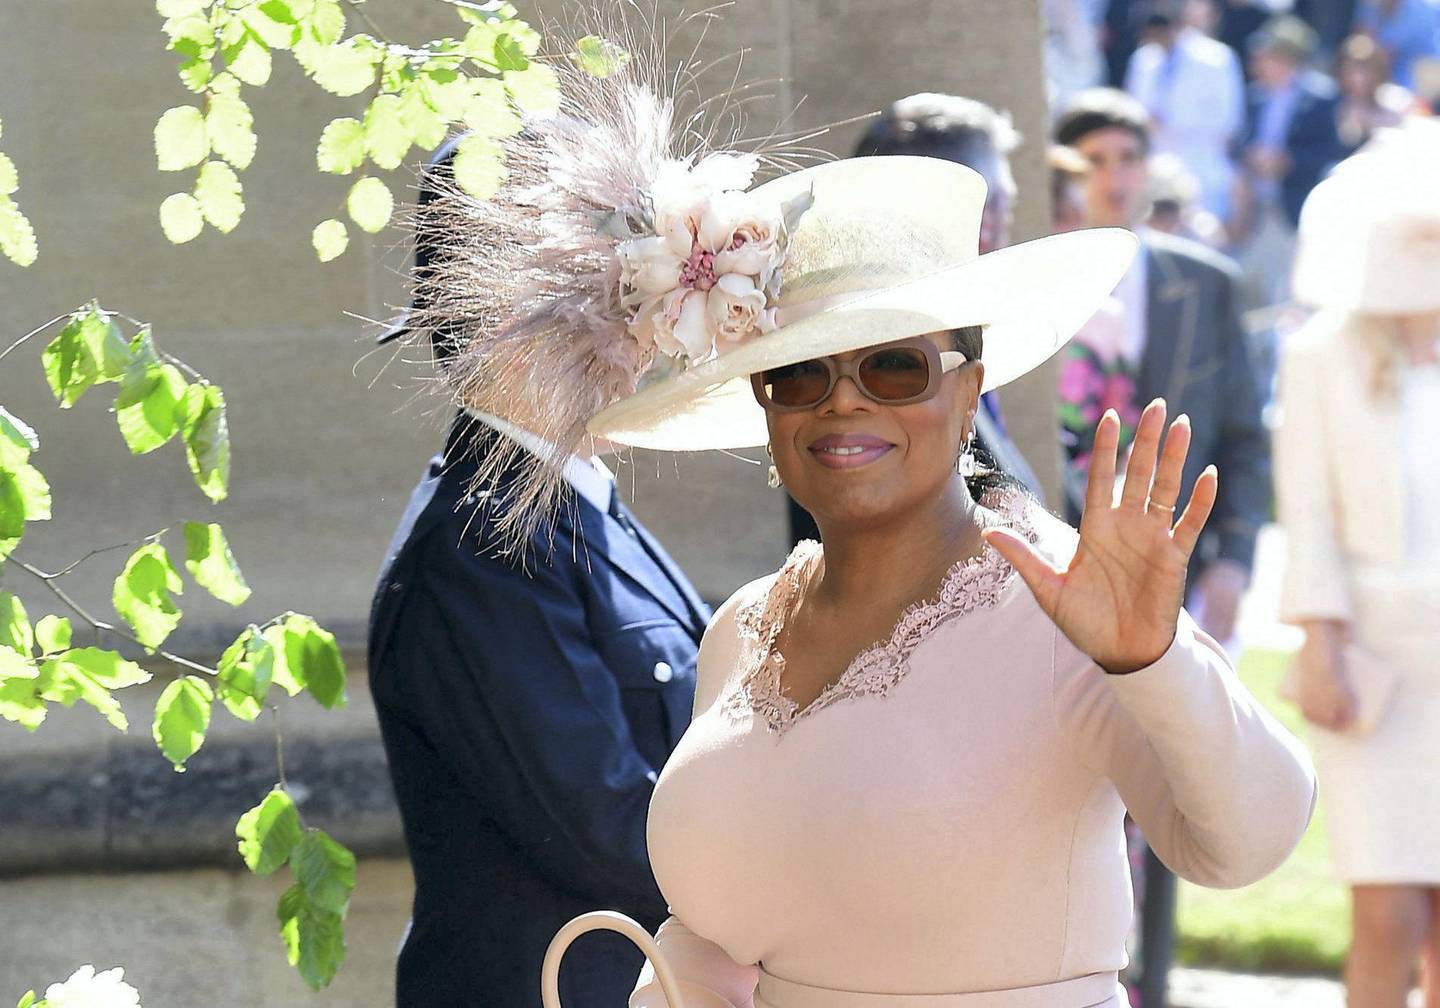 US presenter Oprah Winfrey arrives for the wedding ceremony of Britain's Prince Harry, Duke of Sussex and US actress Meghan Markle at St George's Chapel, Windsor Castle, in Windsor, on May 19, 2018. / AFP PHOTO / POOL / Ian West